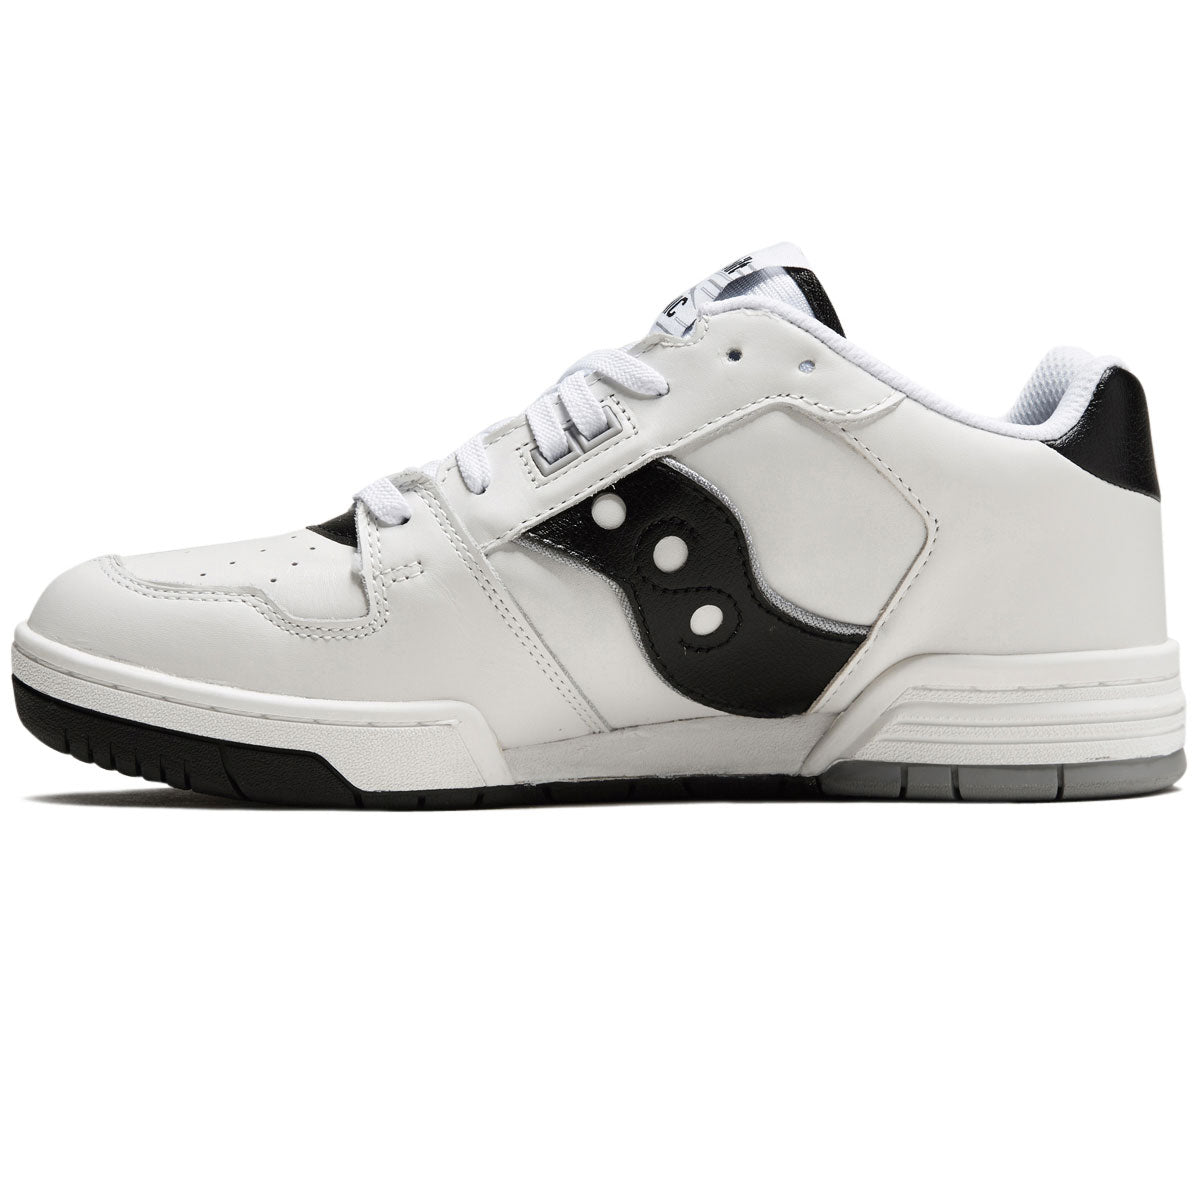 Saucony Sonic Low Shoes - White/Black image 2